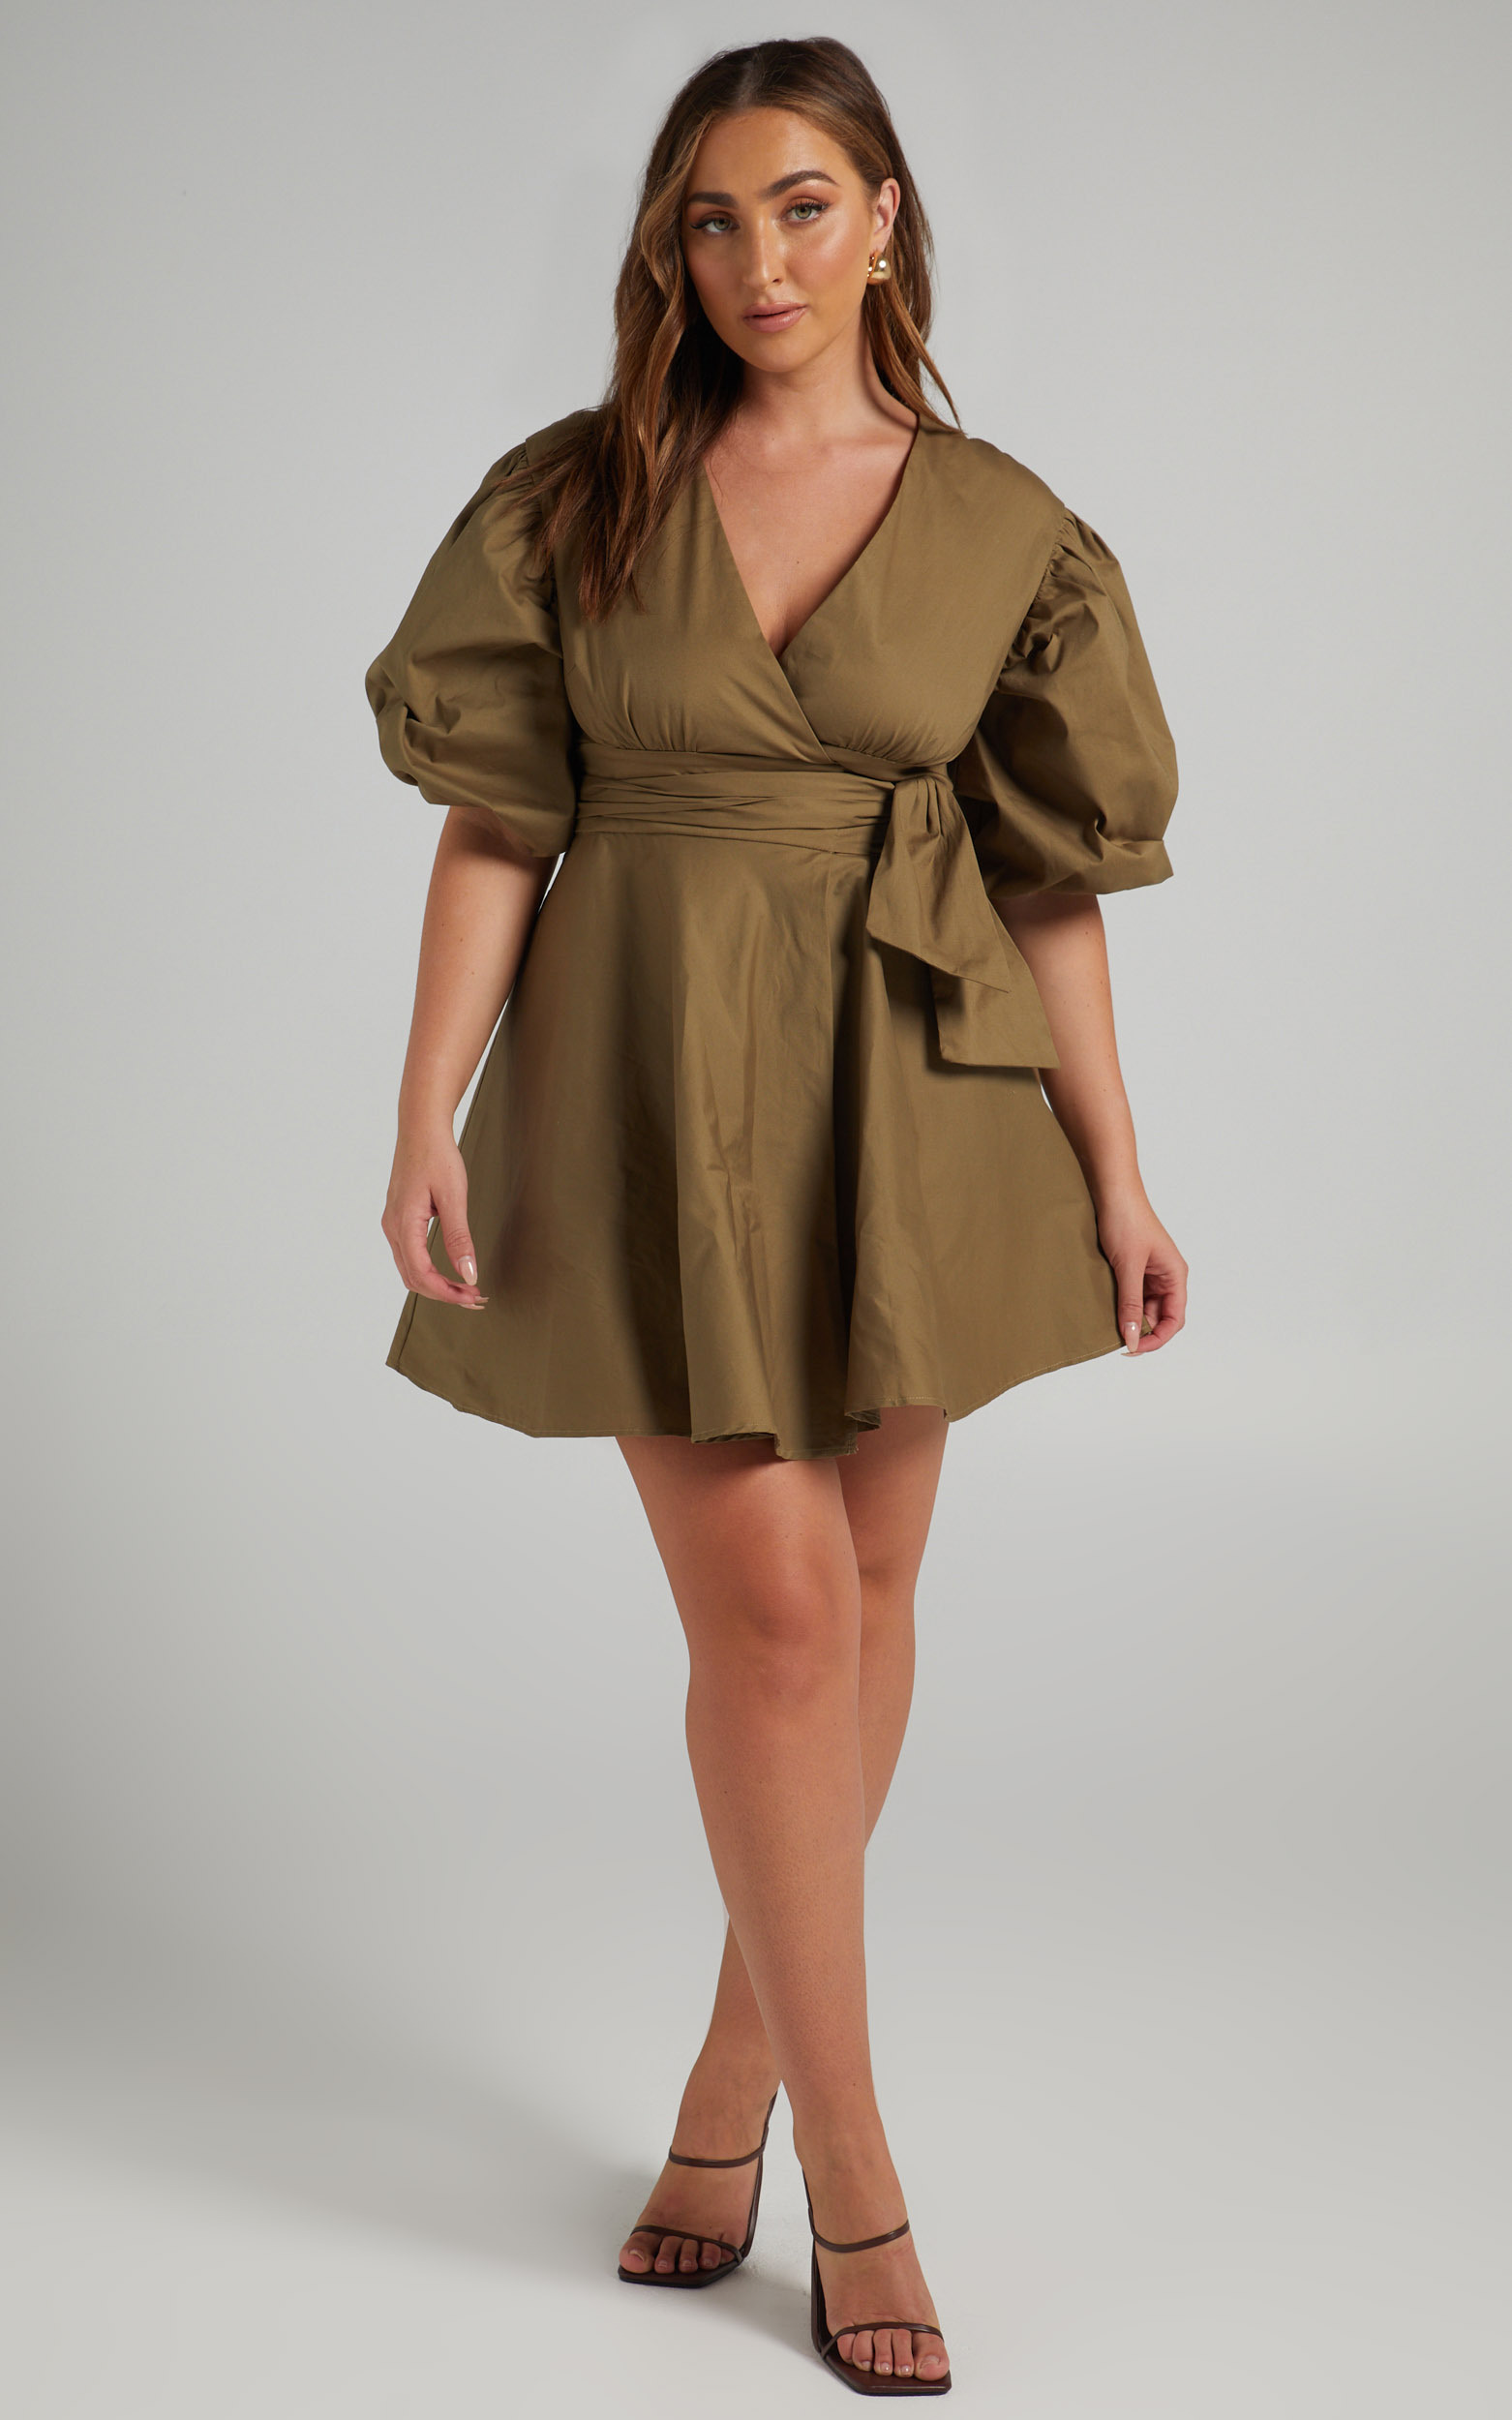 Zyla Puff Sleeve Wrap Mini Dress in Olive - 04, GRN3, hi-res image number null